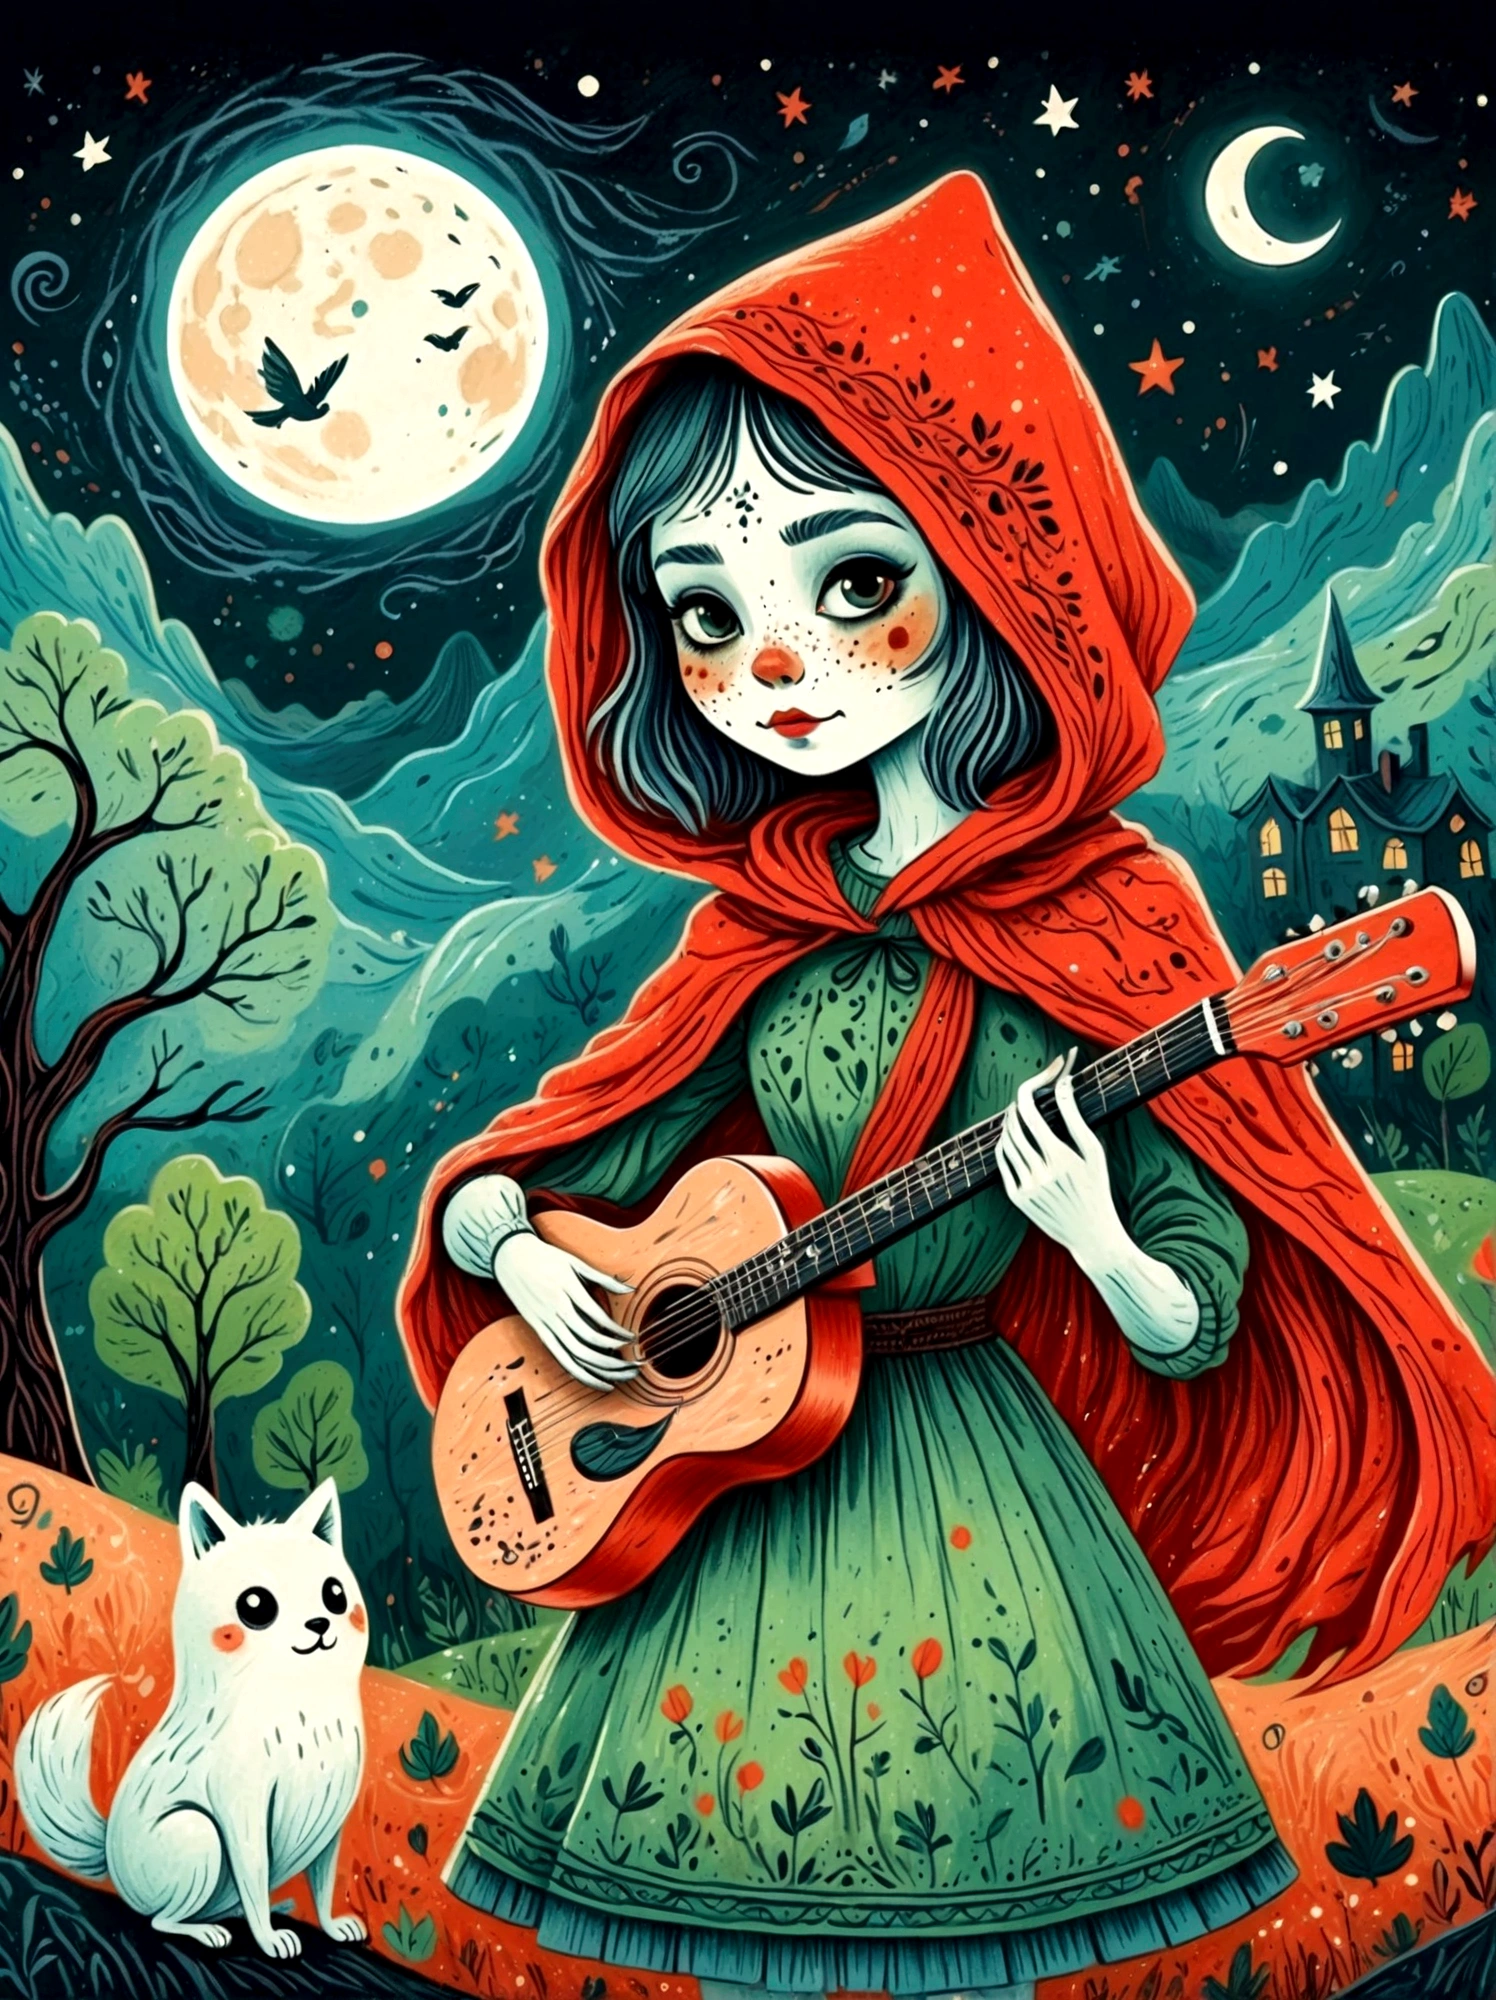 Cartoon hand drawn, 1girl, solo, Cute young charming little red riding hood girl，Strong zombie makeup, Playing an old guitar，the guitar player，Ghost Crowd，Ghost Viewer，Concert scene，Starry nights，Gloomy and foggy atmosphere，The cute absurdity，The attraction and rejection of extraordinary appearance，Magical naive art，Bright blue and green，The color palette is in red, orange and black tones and has a sketchy style, The background should have a simple hand-drawn doodle pattern, 1shxx1